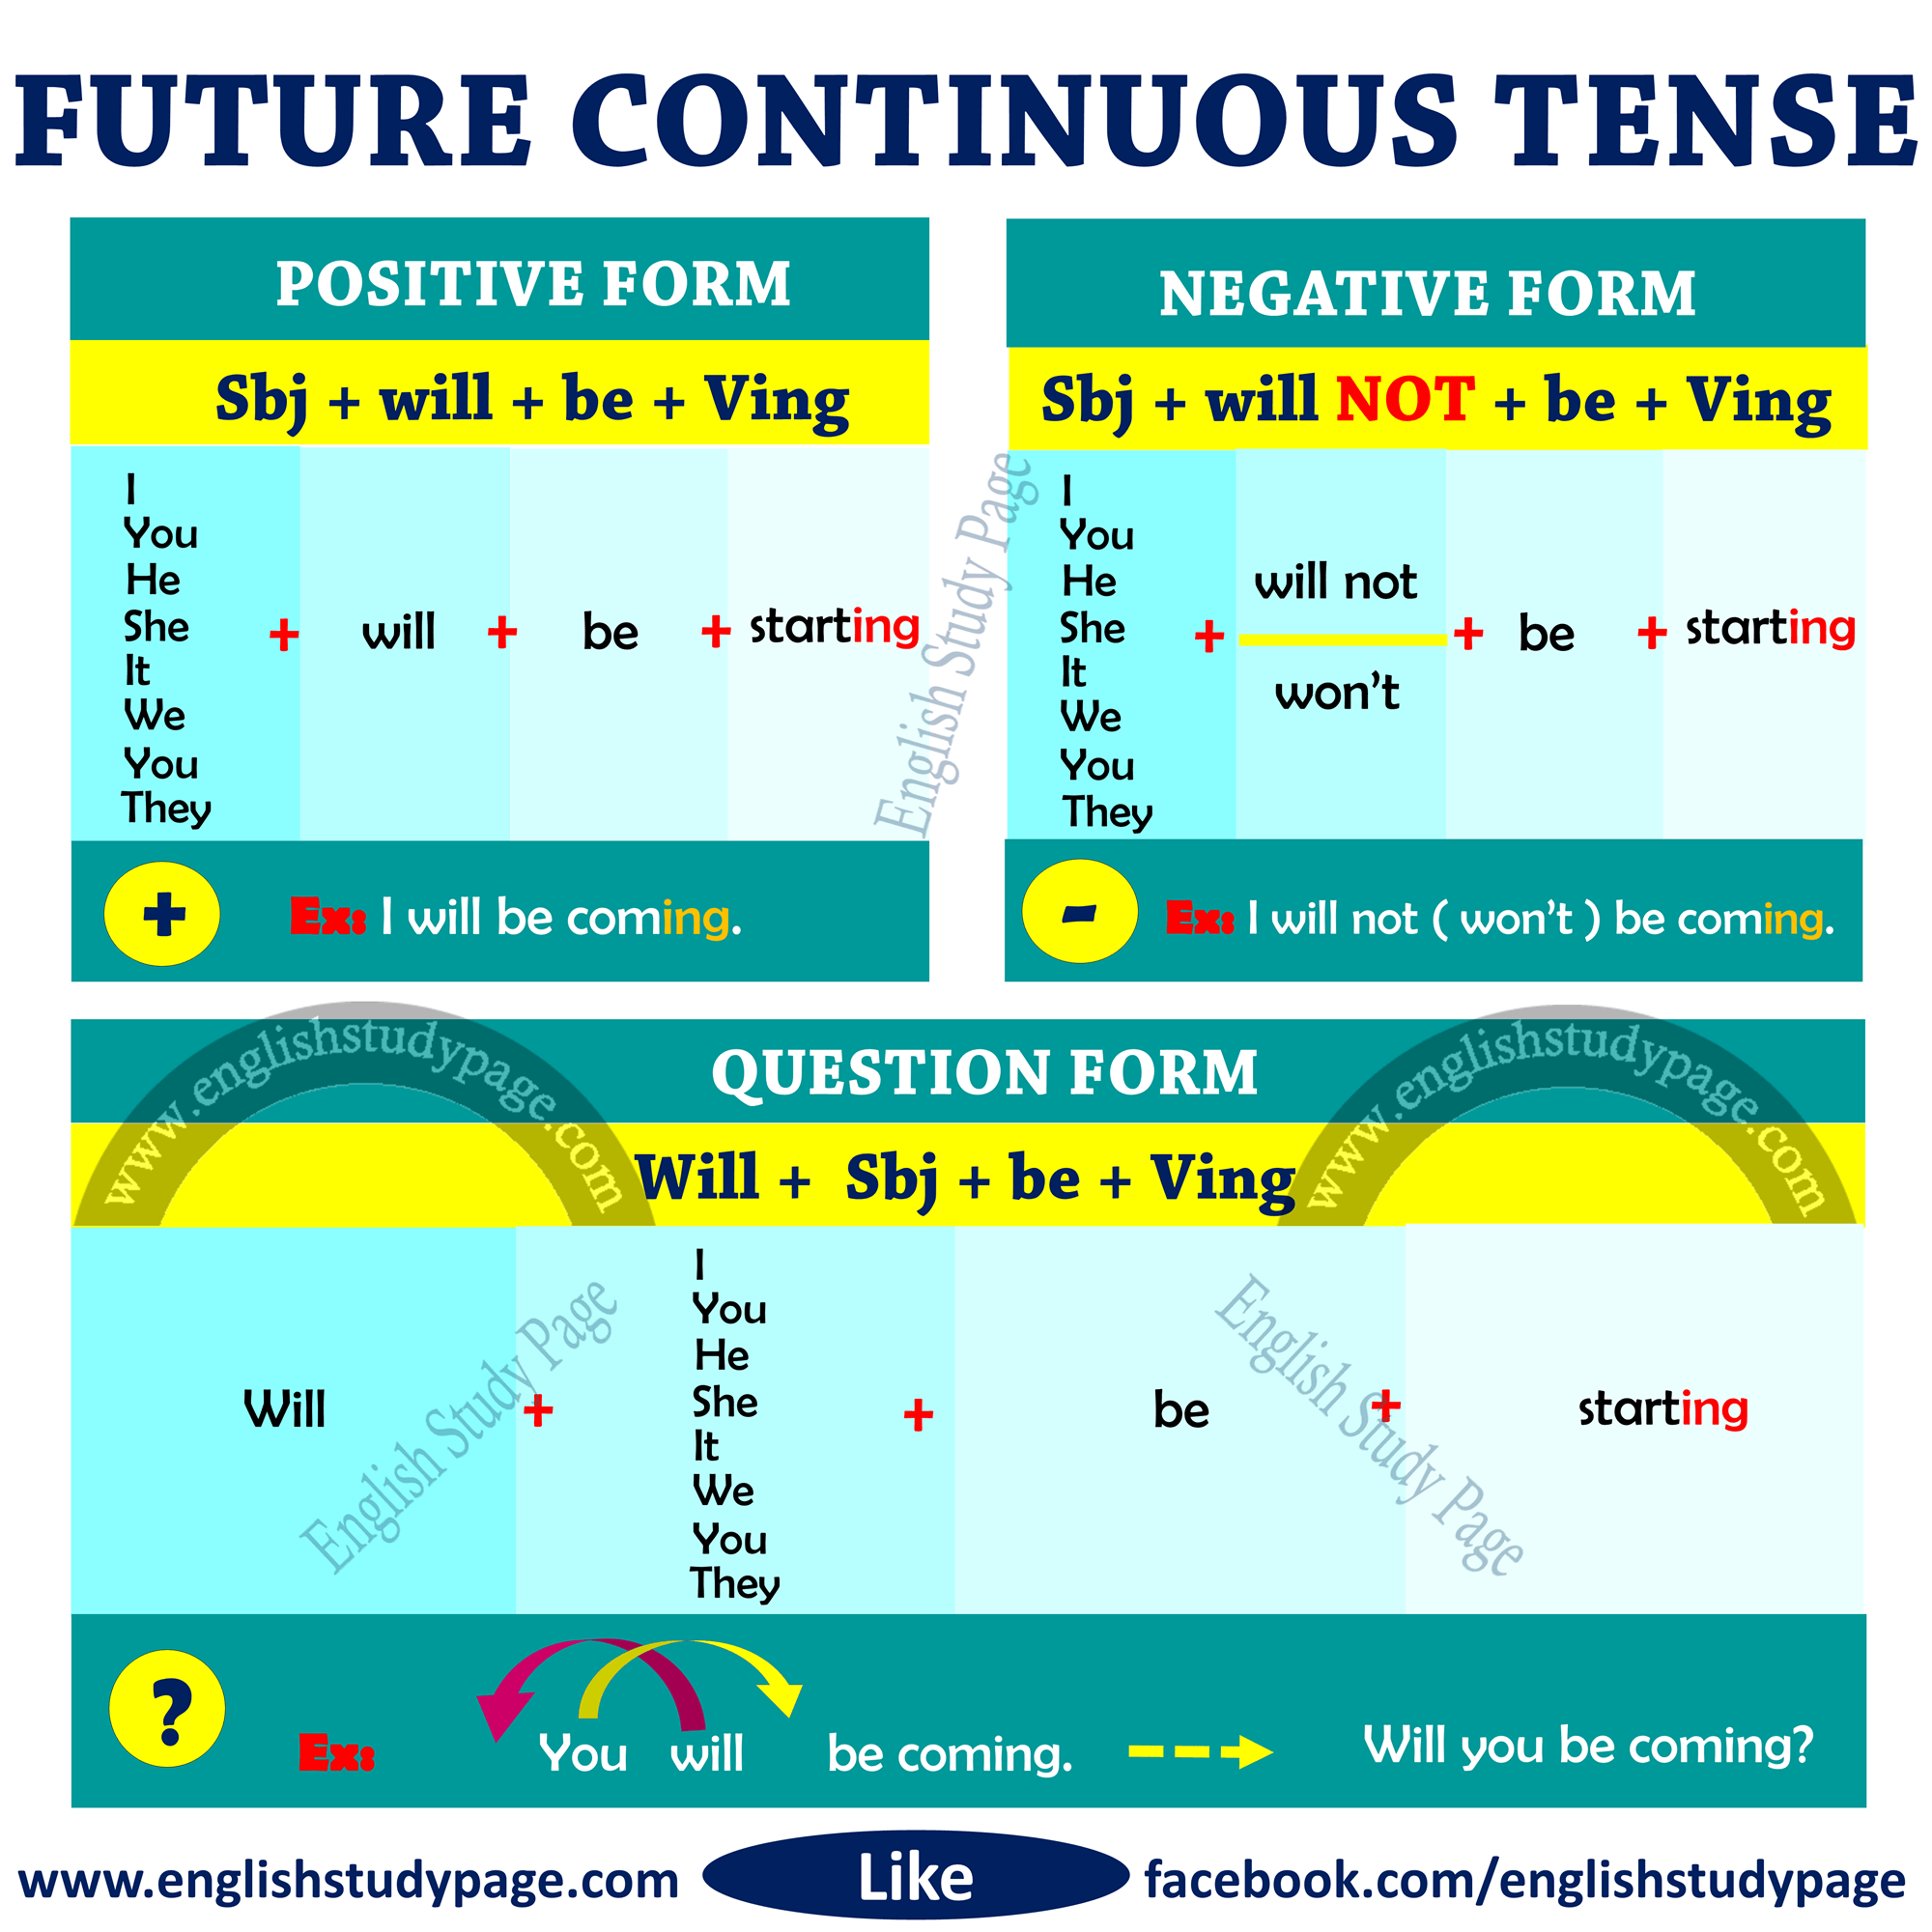 Structure of Future Continuous Tense - English Study Page